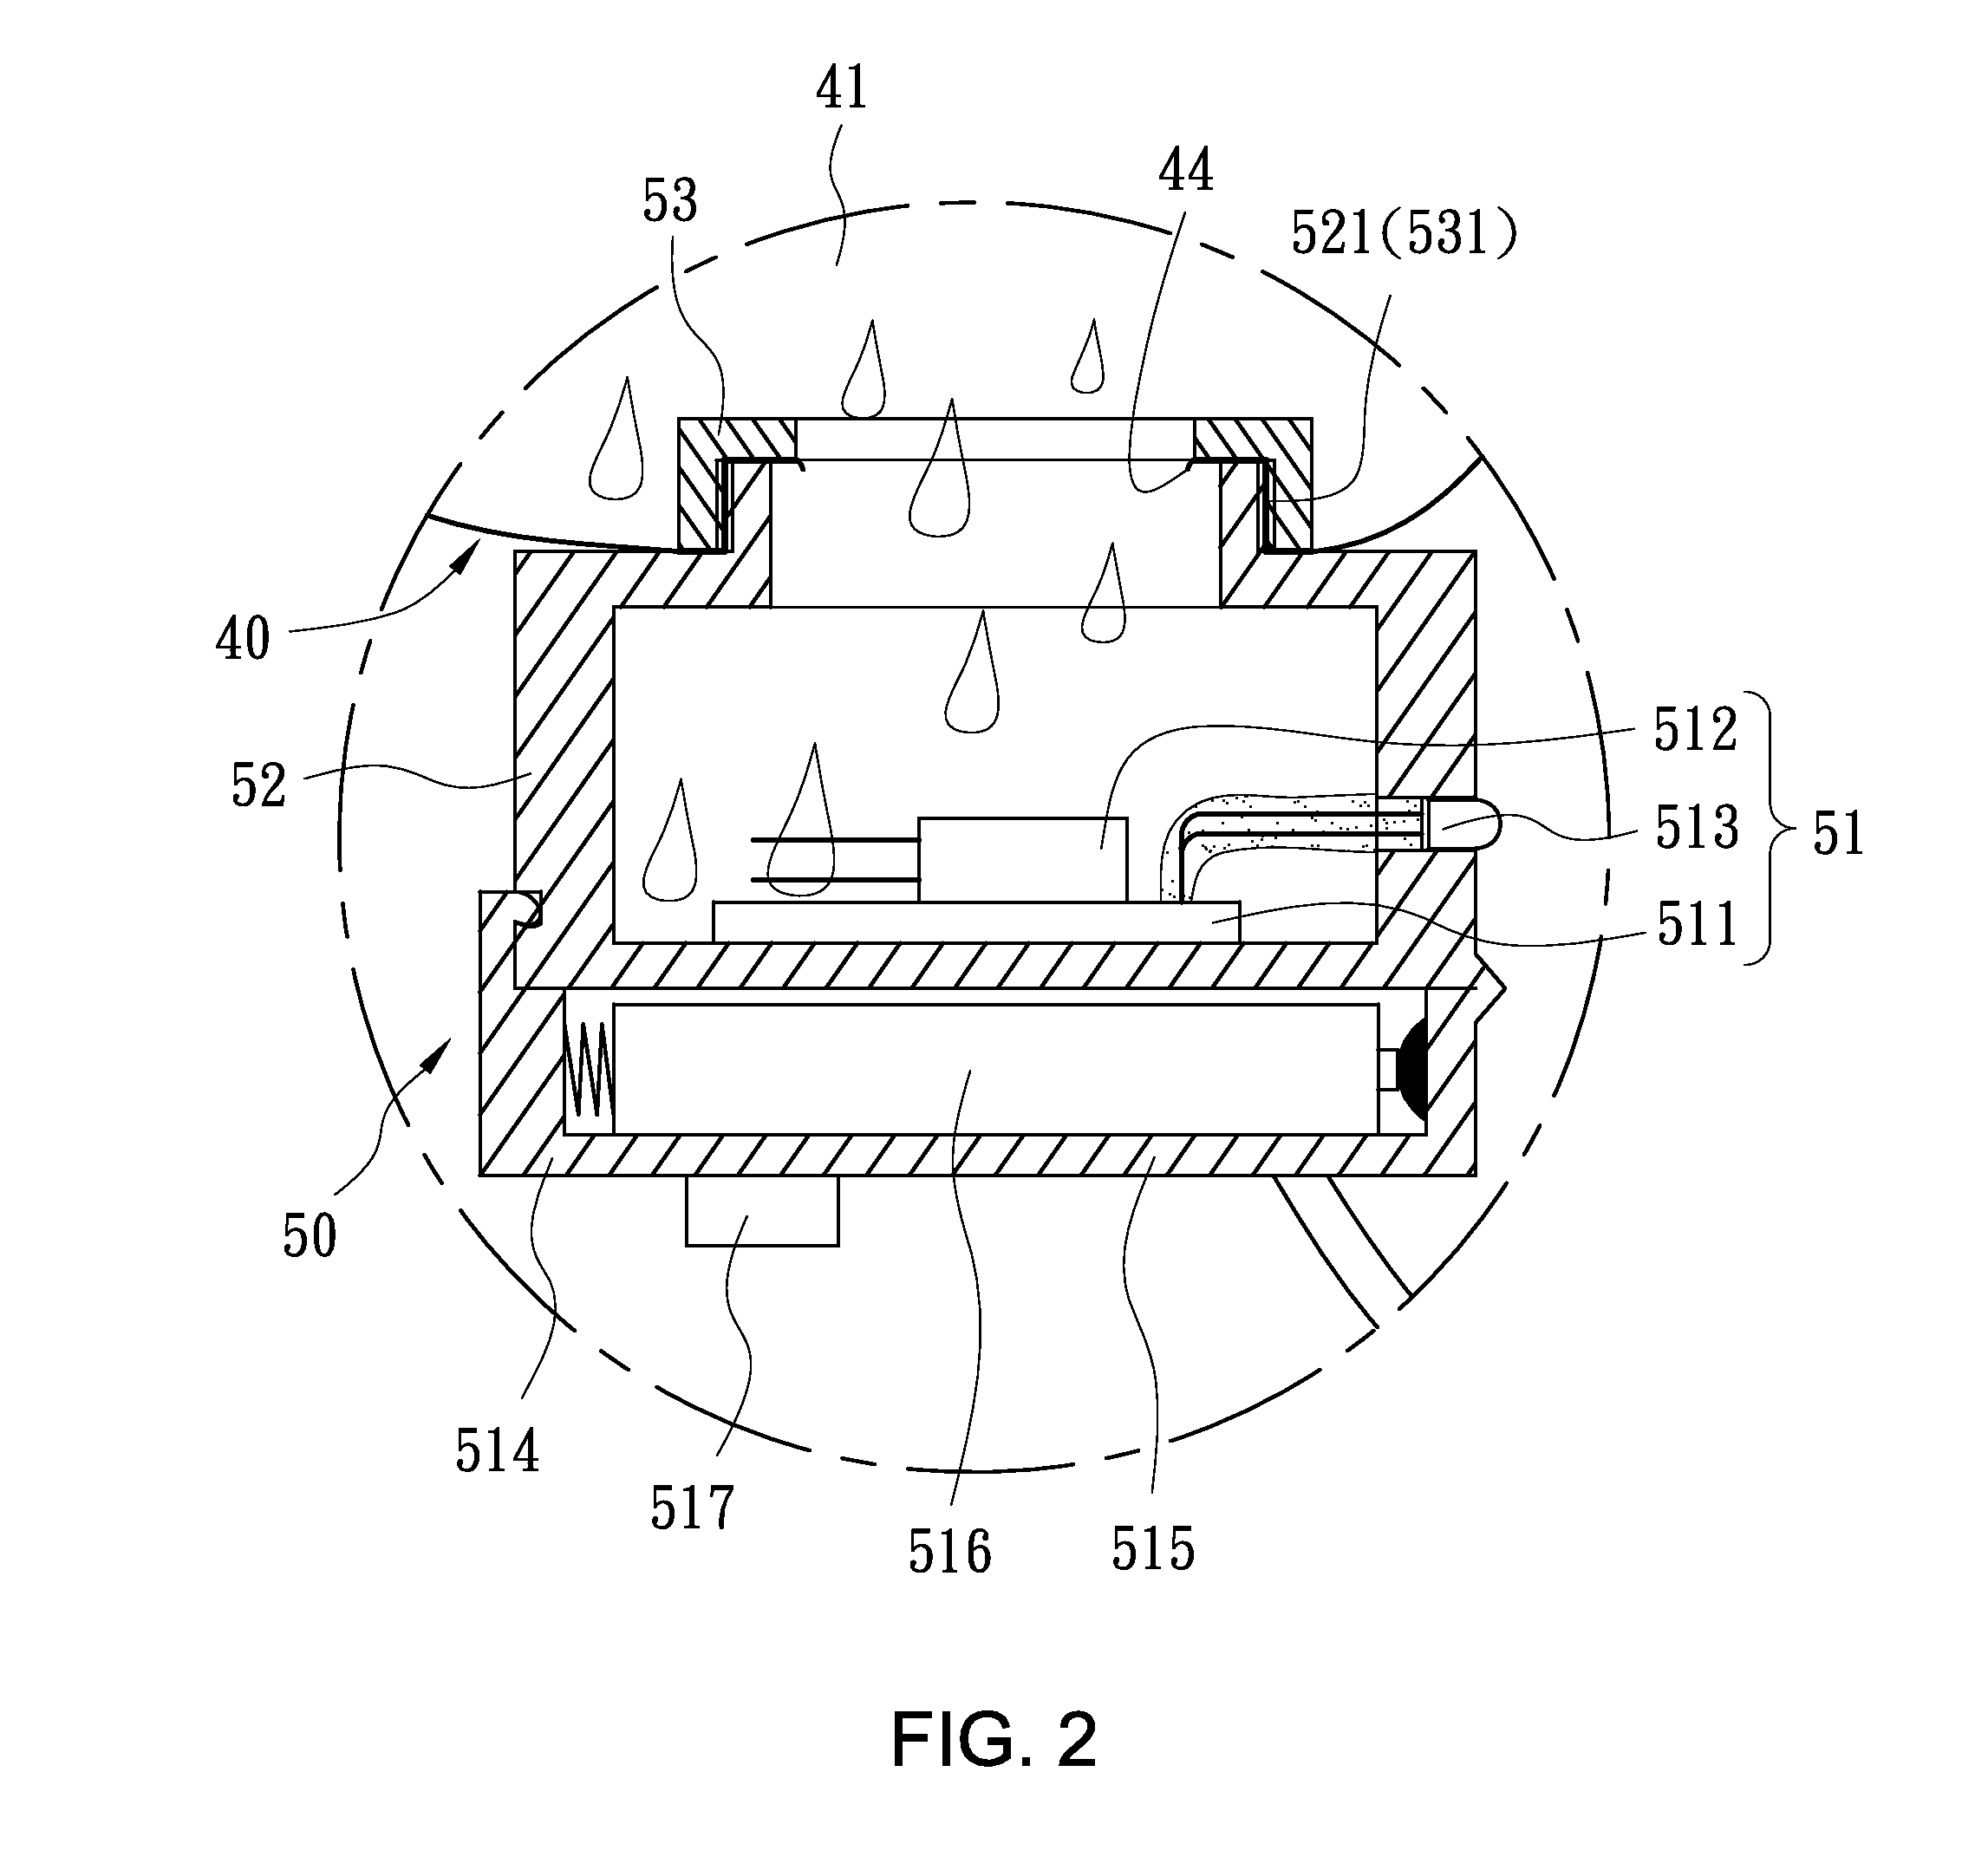 Sanitary automatic water leakage detection and shut-off apparatus